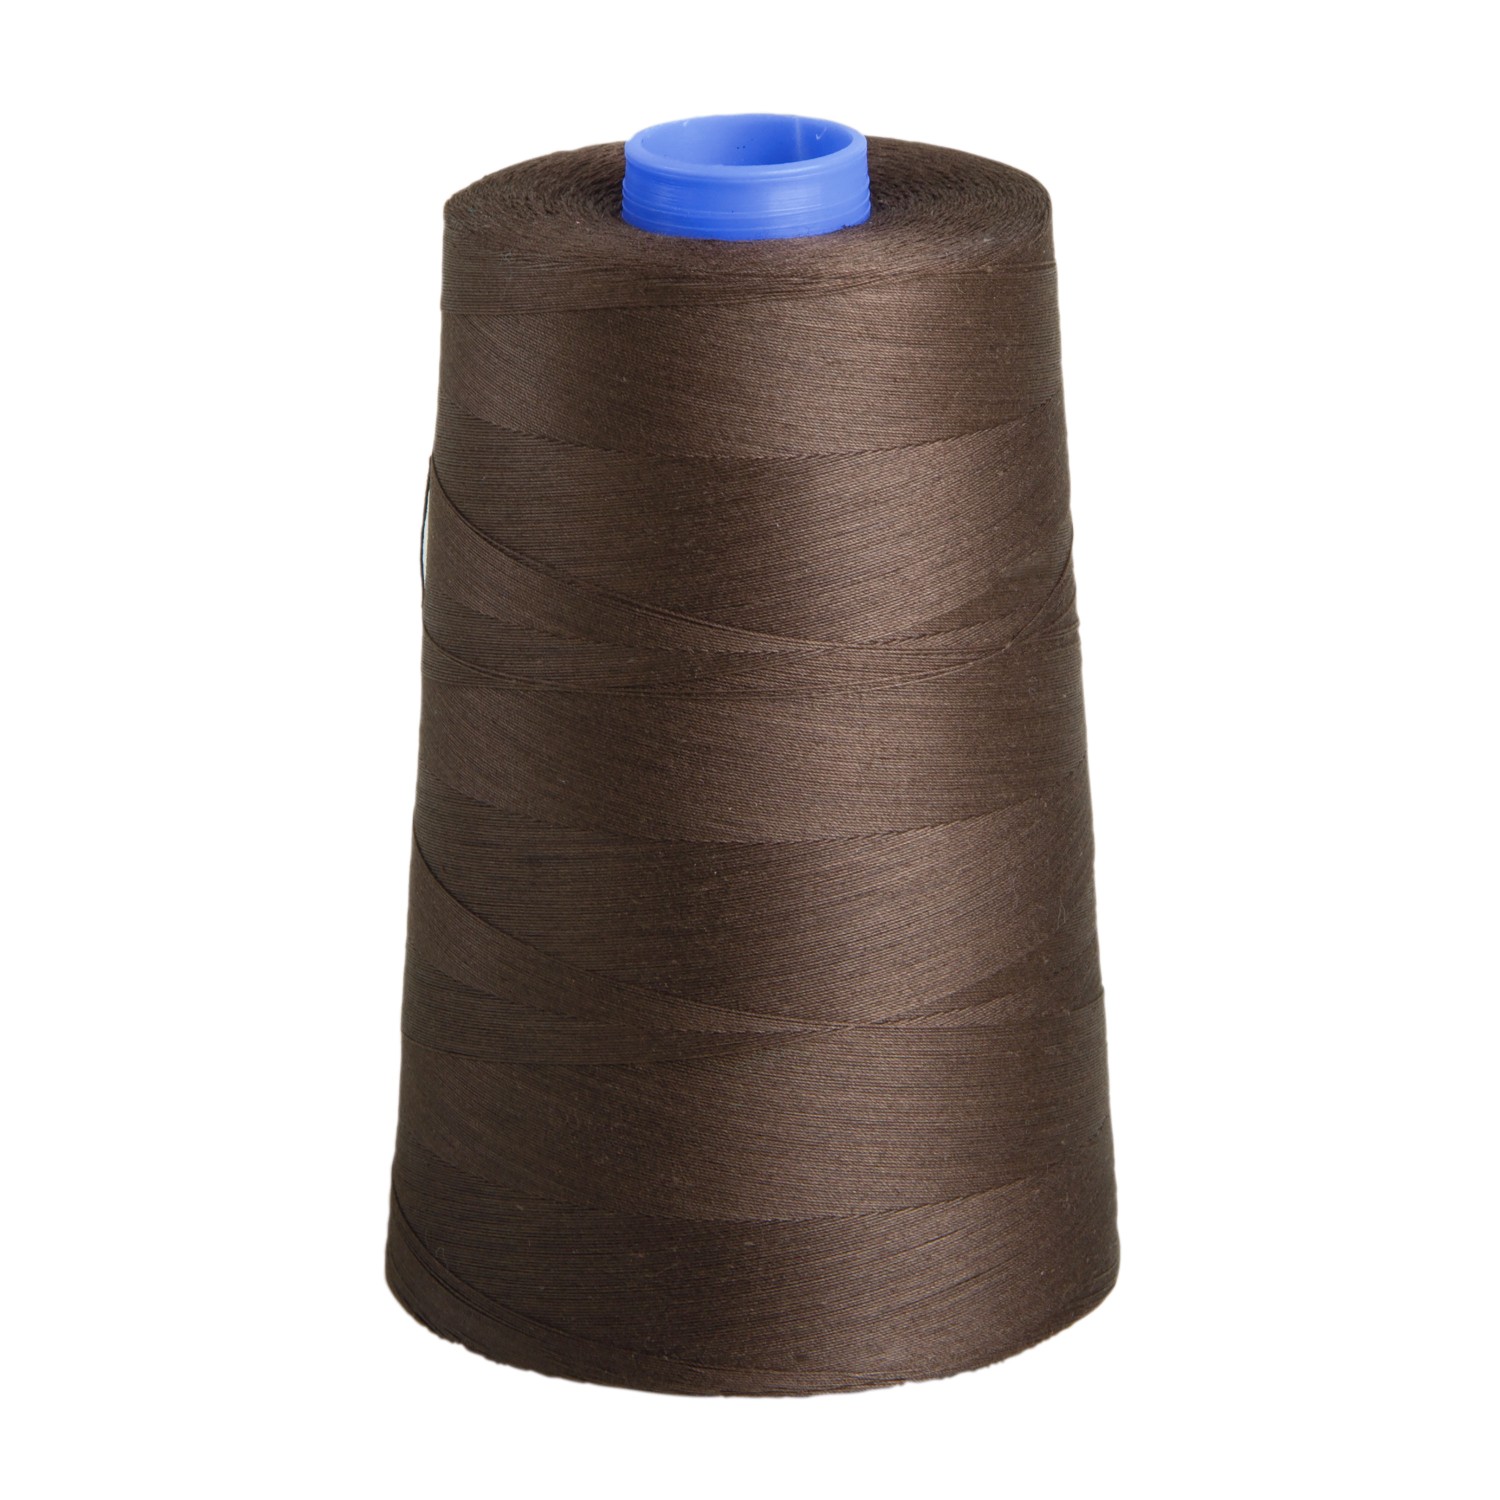  Connecting Threads 100% Cotton Thread - 1200 Yard Spool (Brown)  : Everything Else